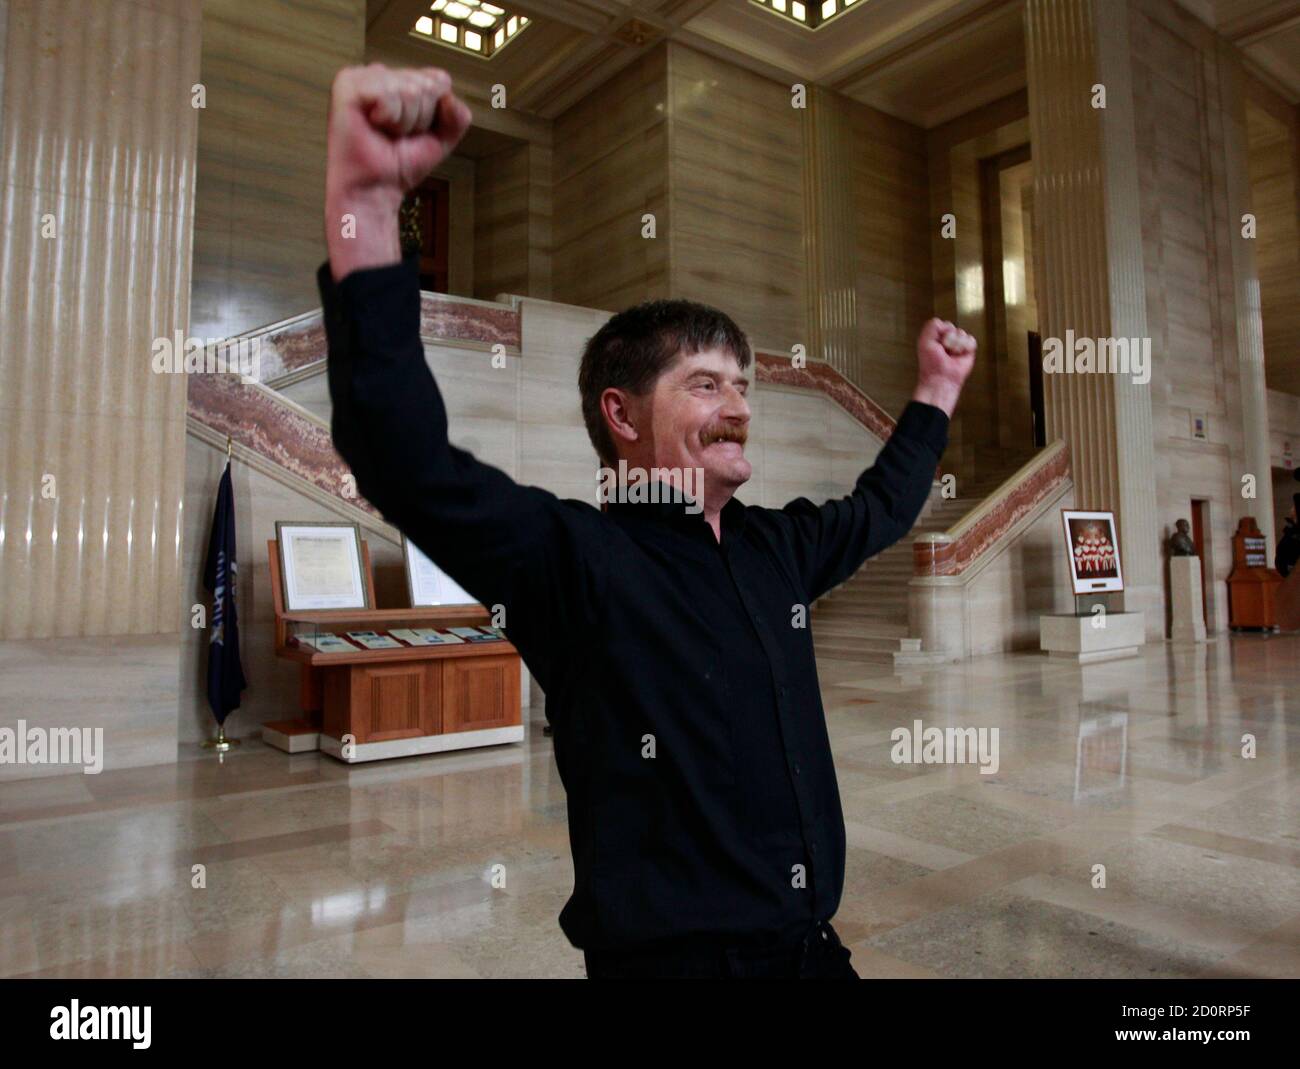 Plaintiff Dean Wilson reacts after hearing the Supreme Court's ruling on Insite, a drug addict safe injection site, in Ottawa September 30, 2011. Wilson was Insite's first user.  REUTERS/Chris Wattie       (CANADA - Tags: POLITICS HEALTH) Stock Photo